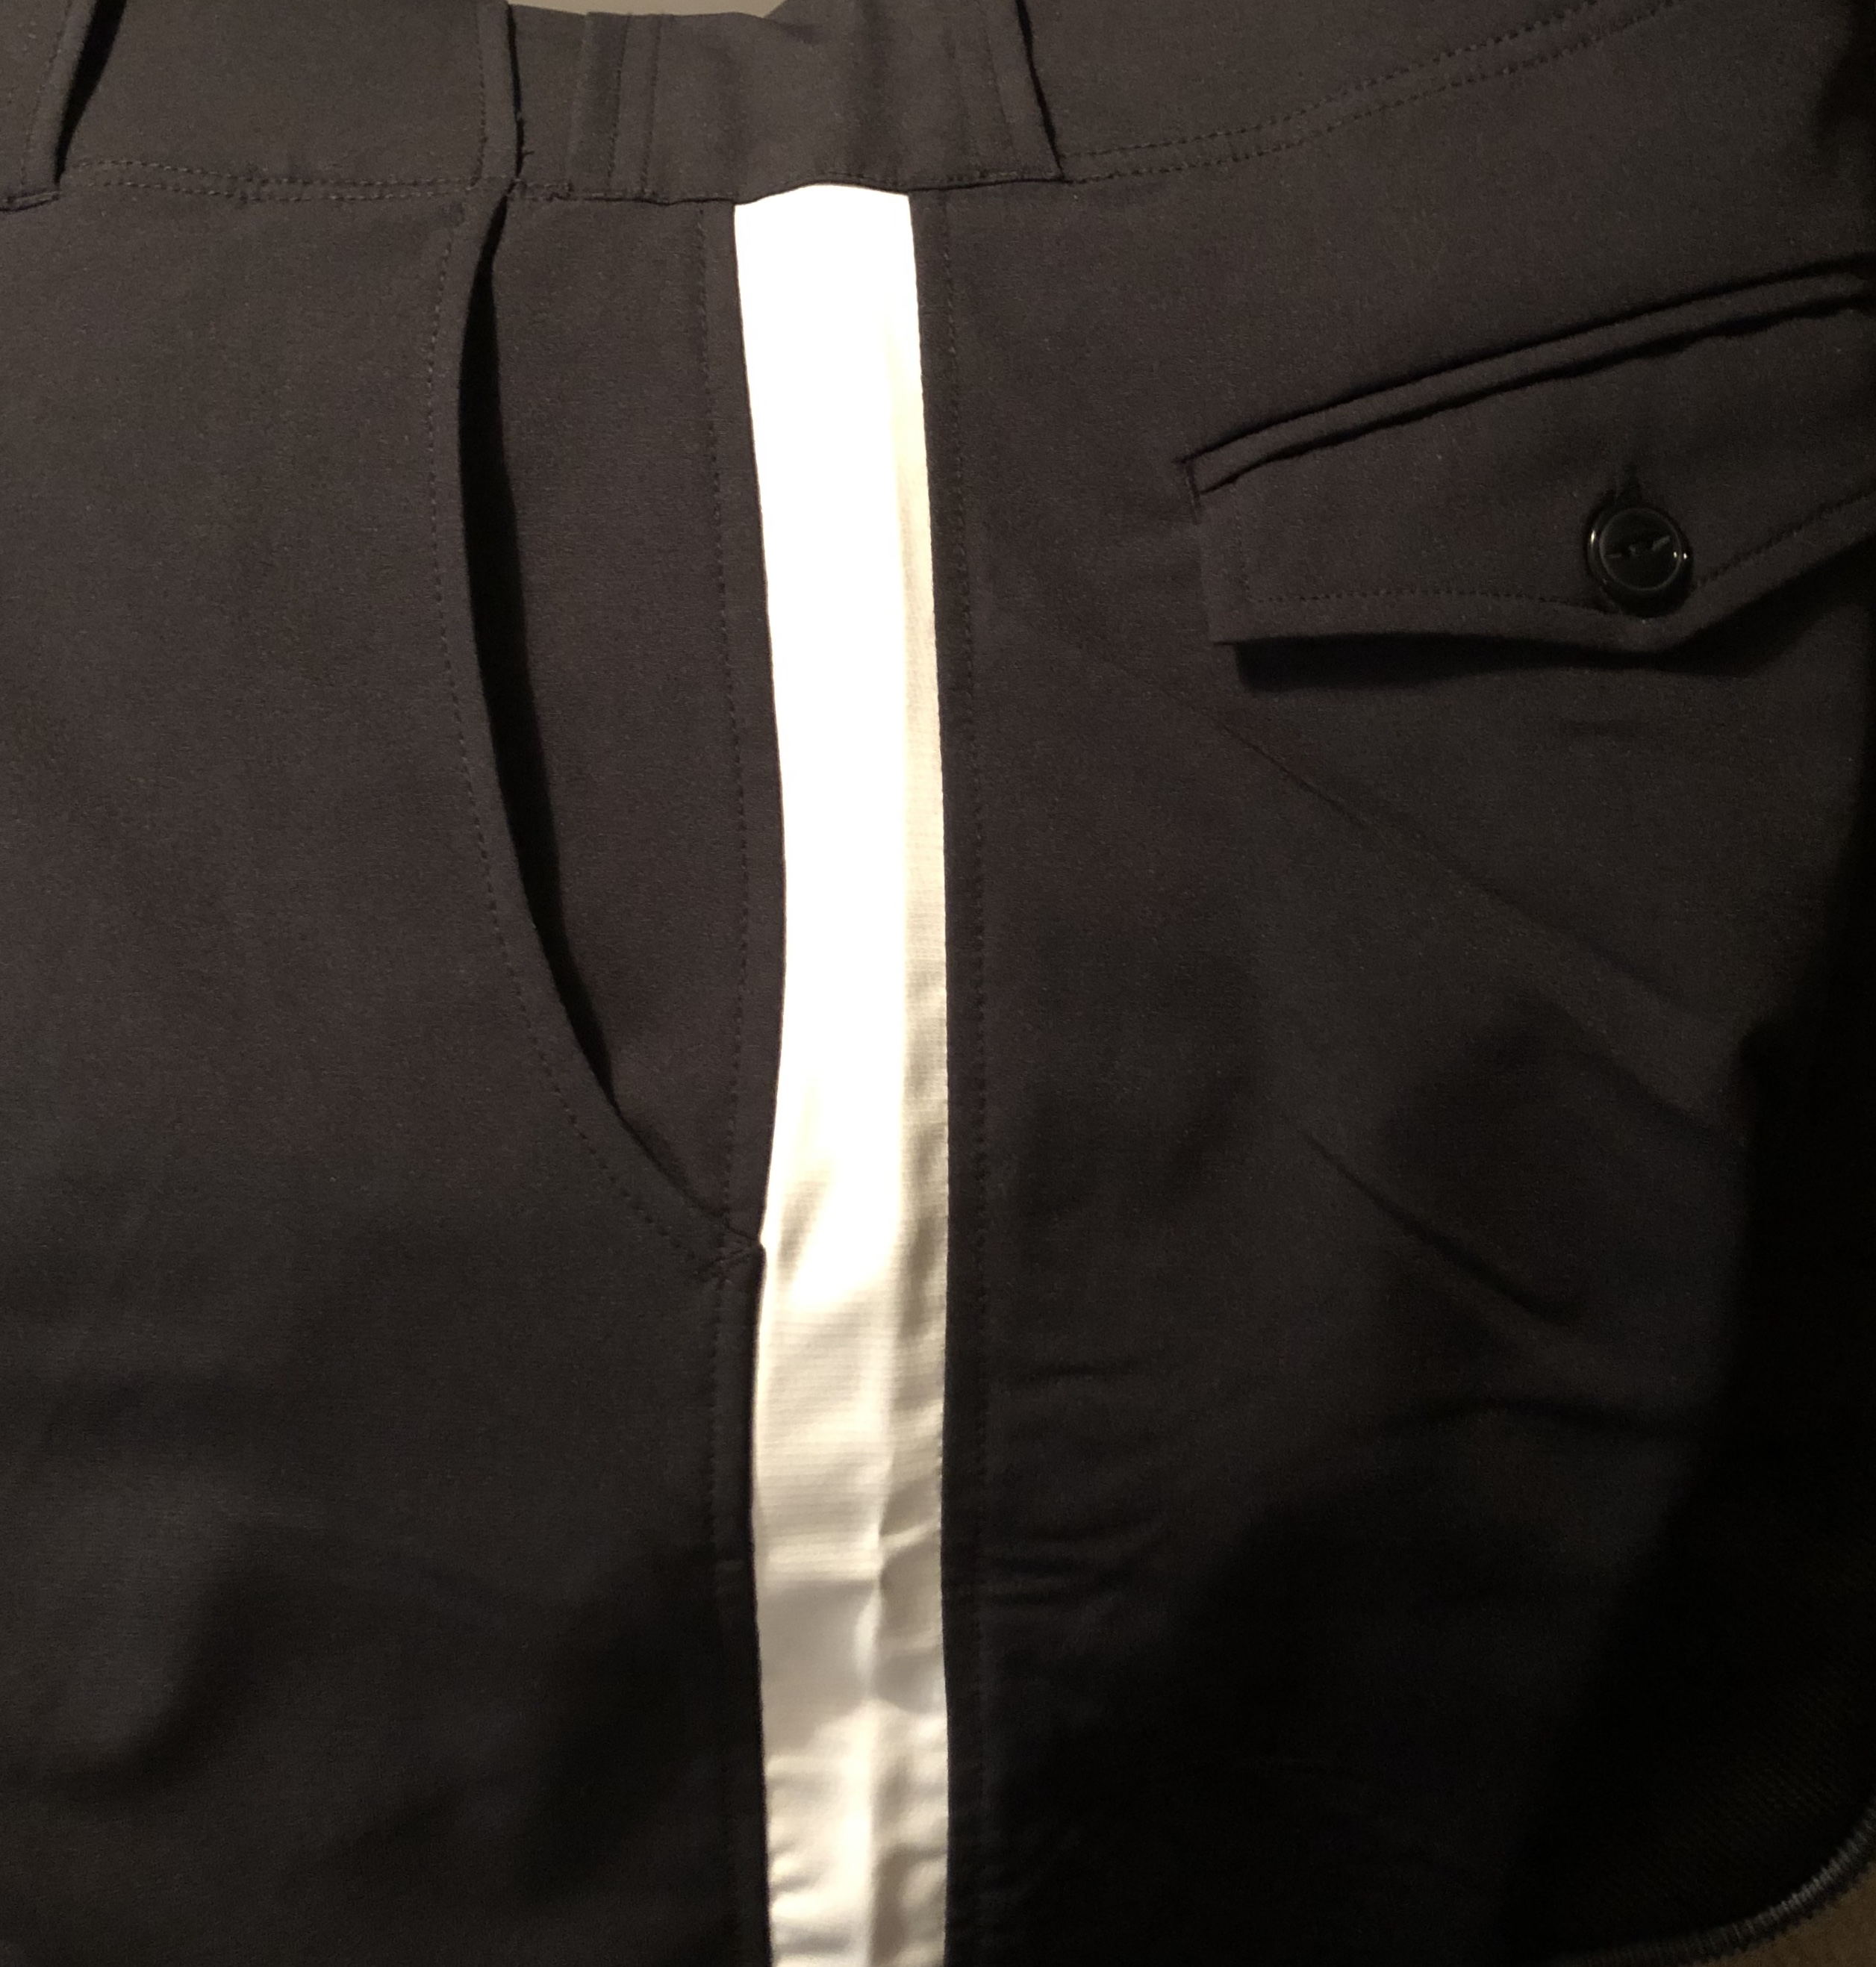 Details about   Honig's Dalco Football Officiating Pants Size Large 36-38 GUC 